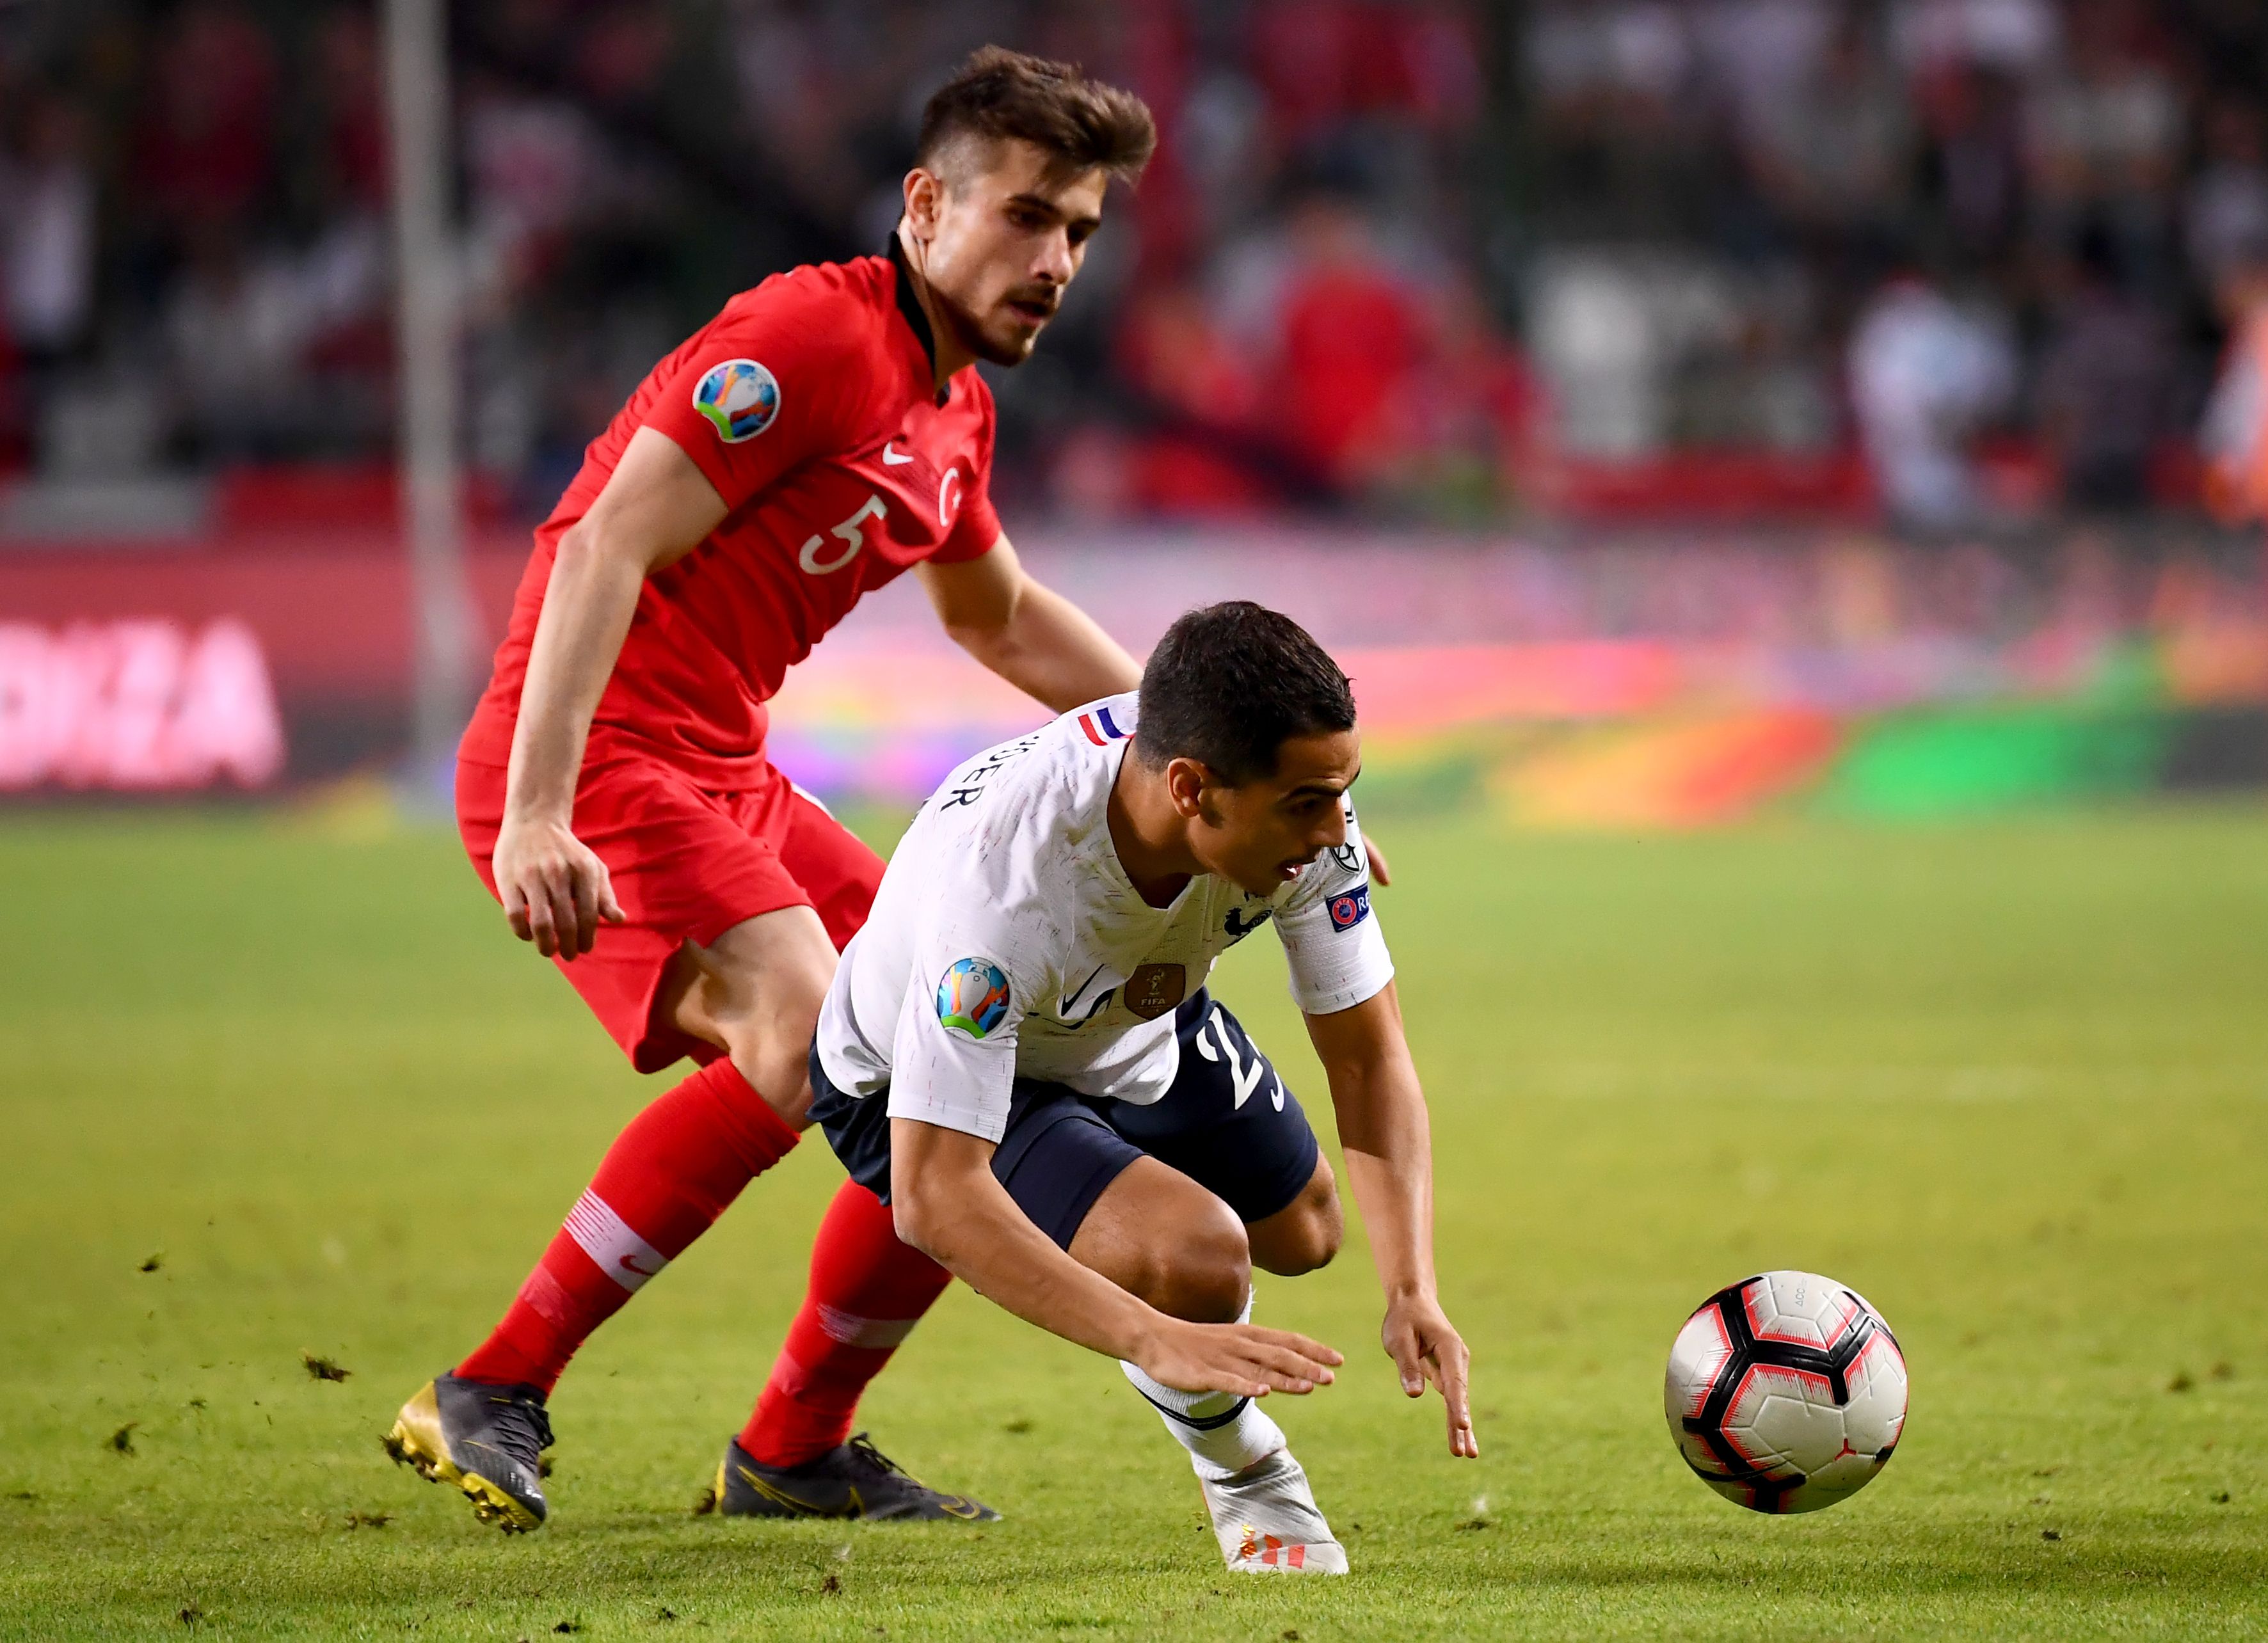 France's midfielder Wissan Ben Yedder (R) vies with Turkey's midfielder Dorukhan Tokoz during the Euro 2020 football qualification match between Turkey and France at the Buyuksehir Belediyesi stadium in Konya, on June 8, 2019. (Photo by FRANCK FIFE / AFP)        (Photo credit should read FRANCK FIFE/AFP/Getty Images)